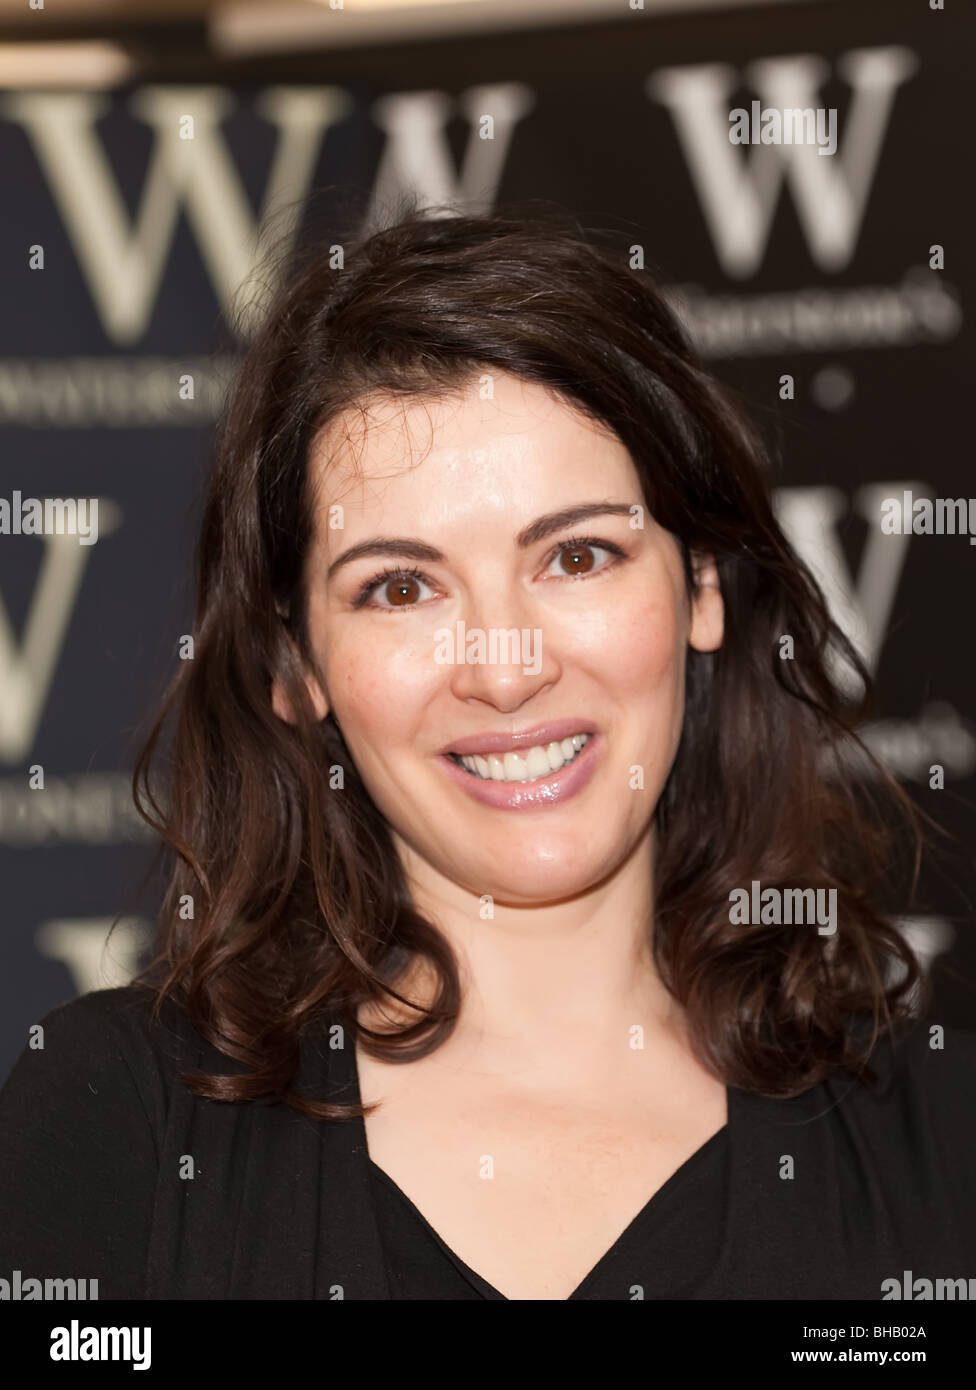 Nigella Lawson at book signing at Waterstone's Bluewater Stock Photo